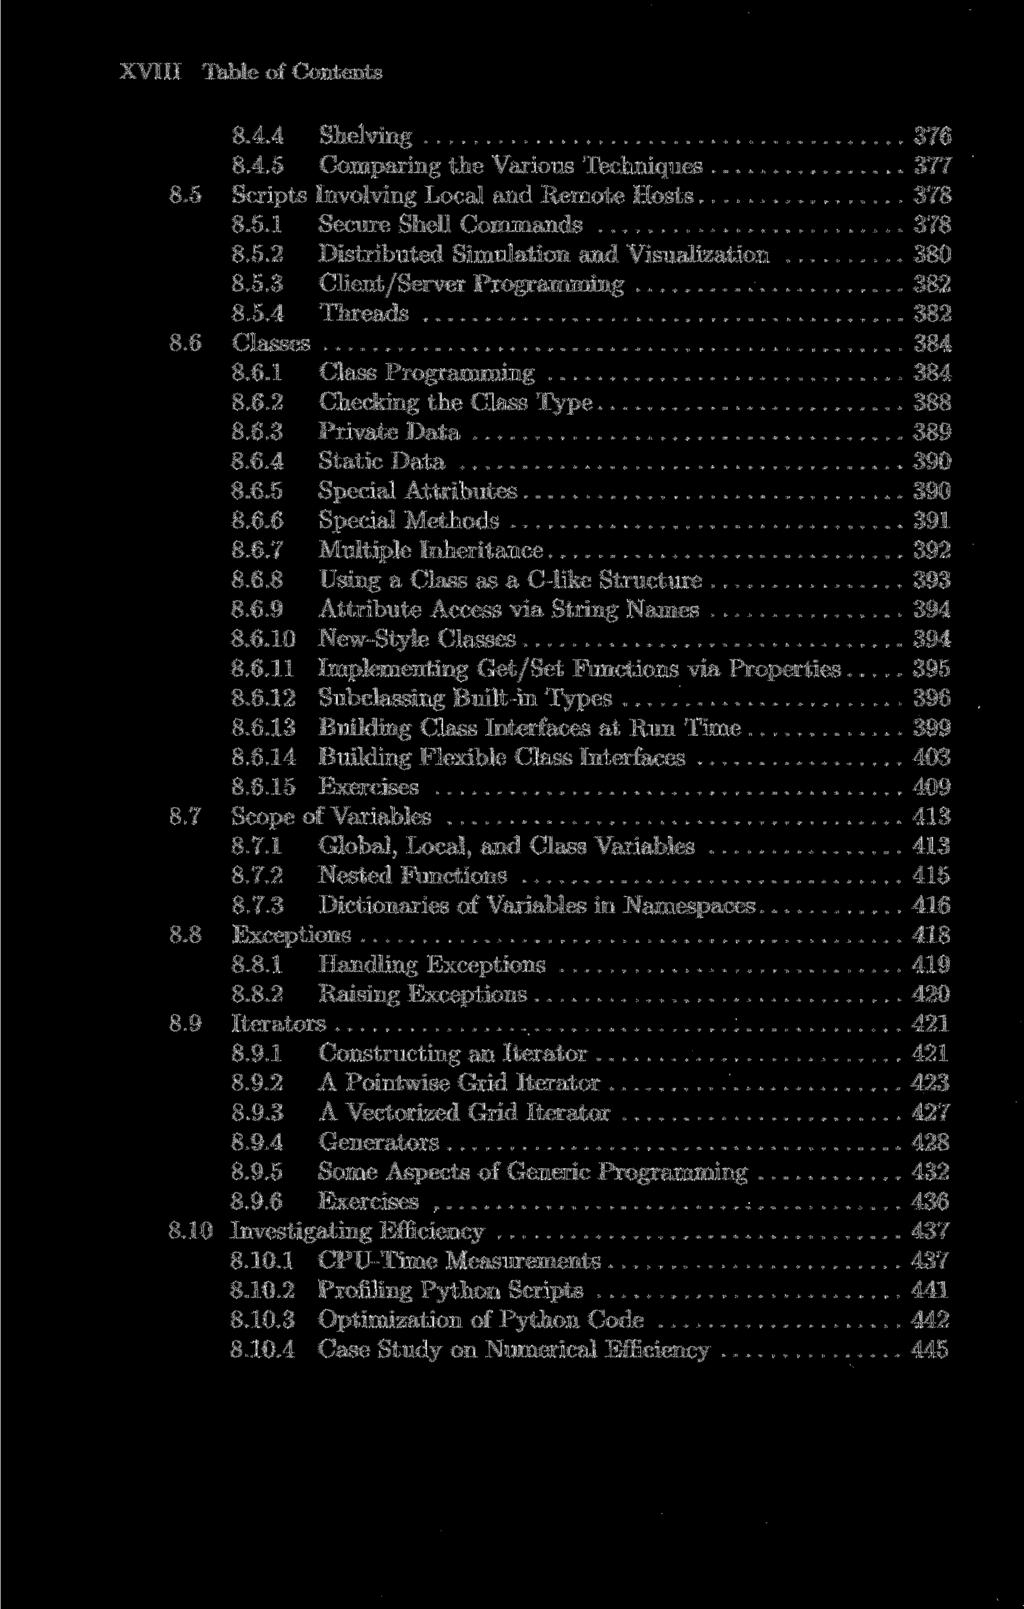 XVIII Table of Contents 8.4.4 Shelving 376 8.4.5 Comparing the Various Techniques 377 8.5 Scripts Involving Local and Remote Hosts 378 8.5.1 Secure Shell Commands 378 8.5.2 Distributed Simulation and Visualization 380 8.